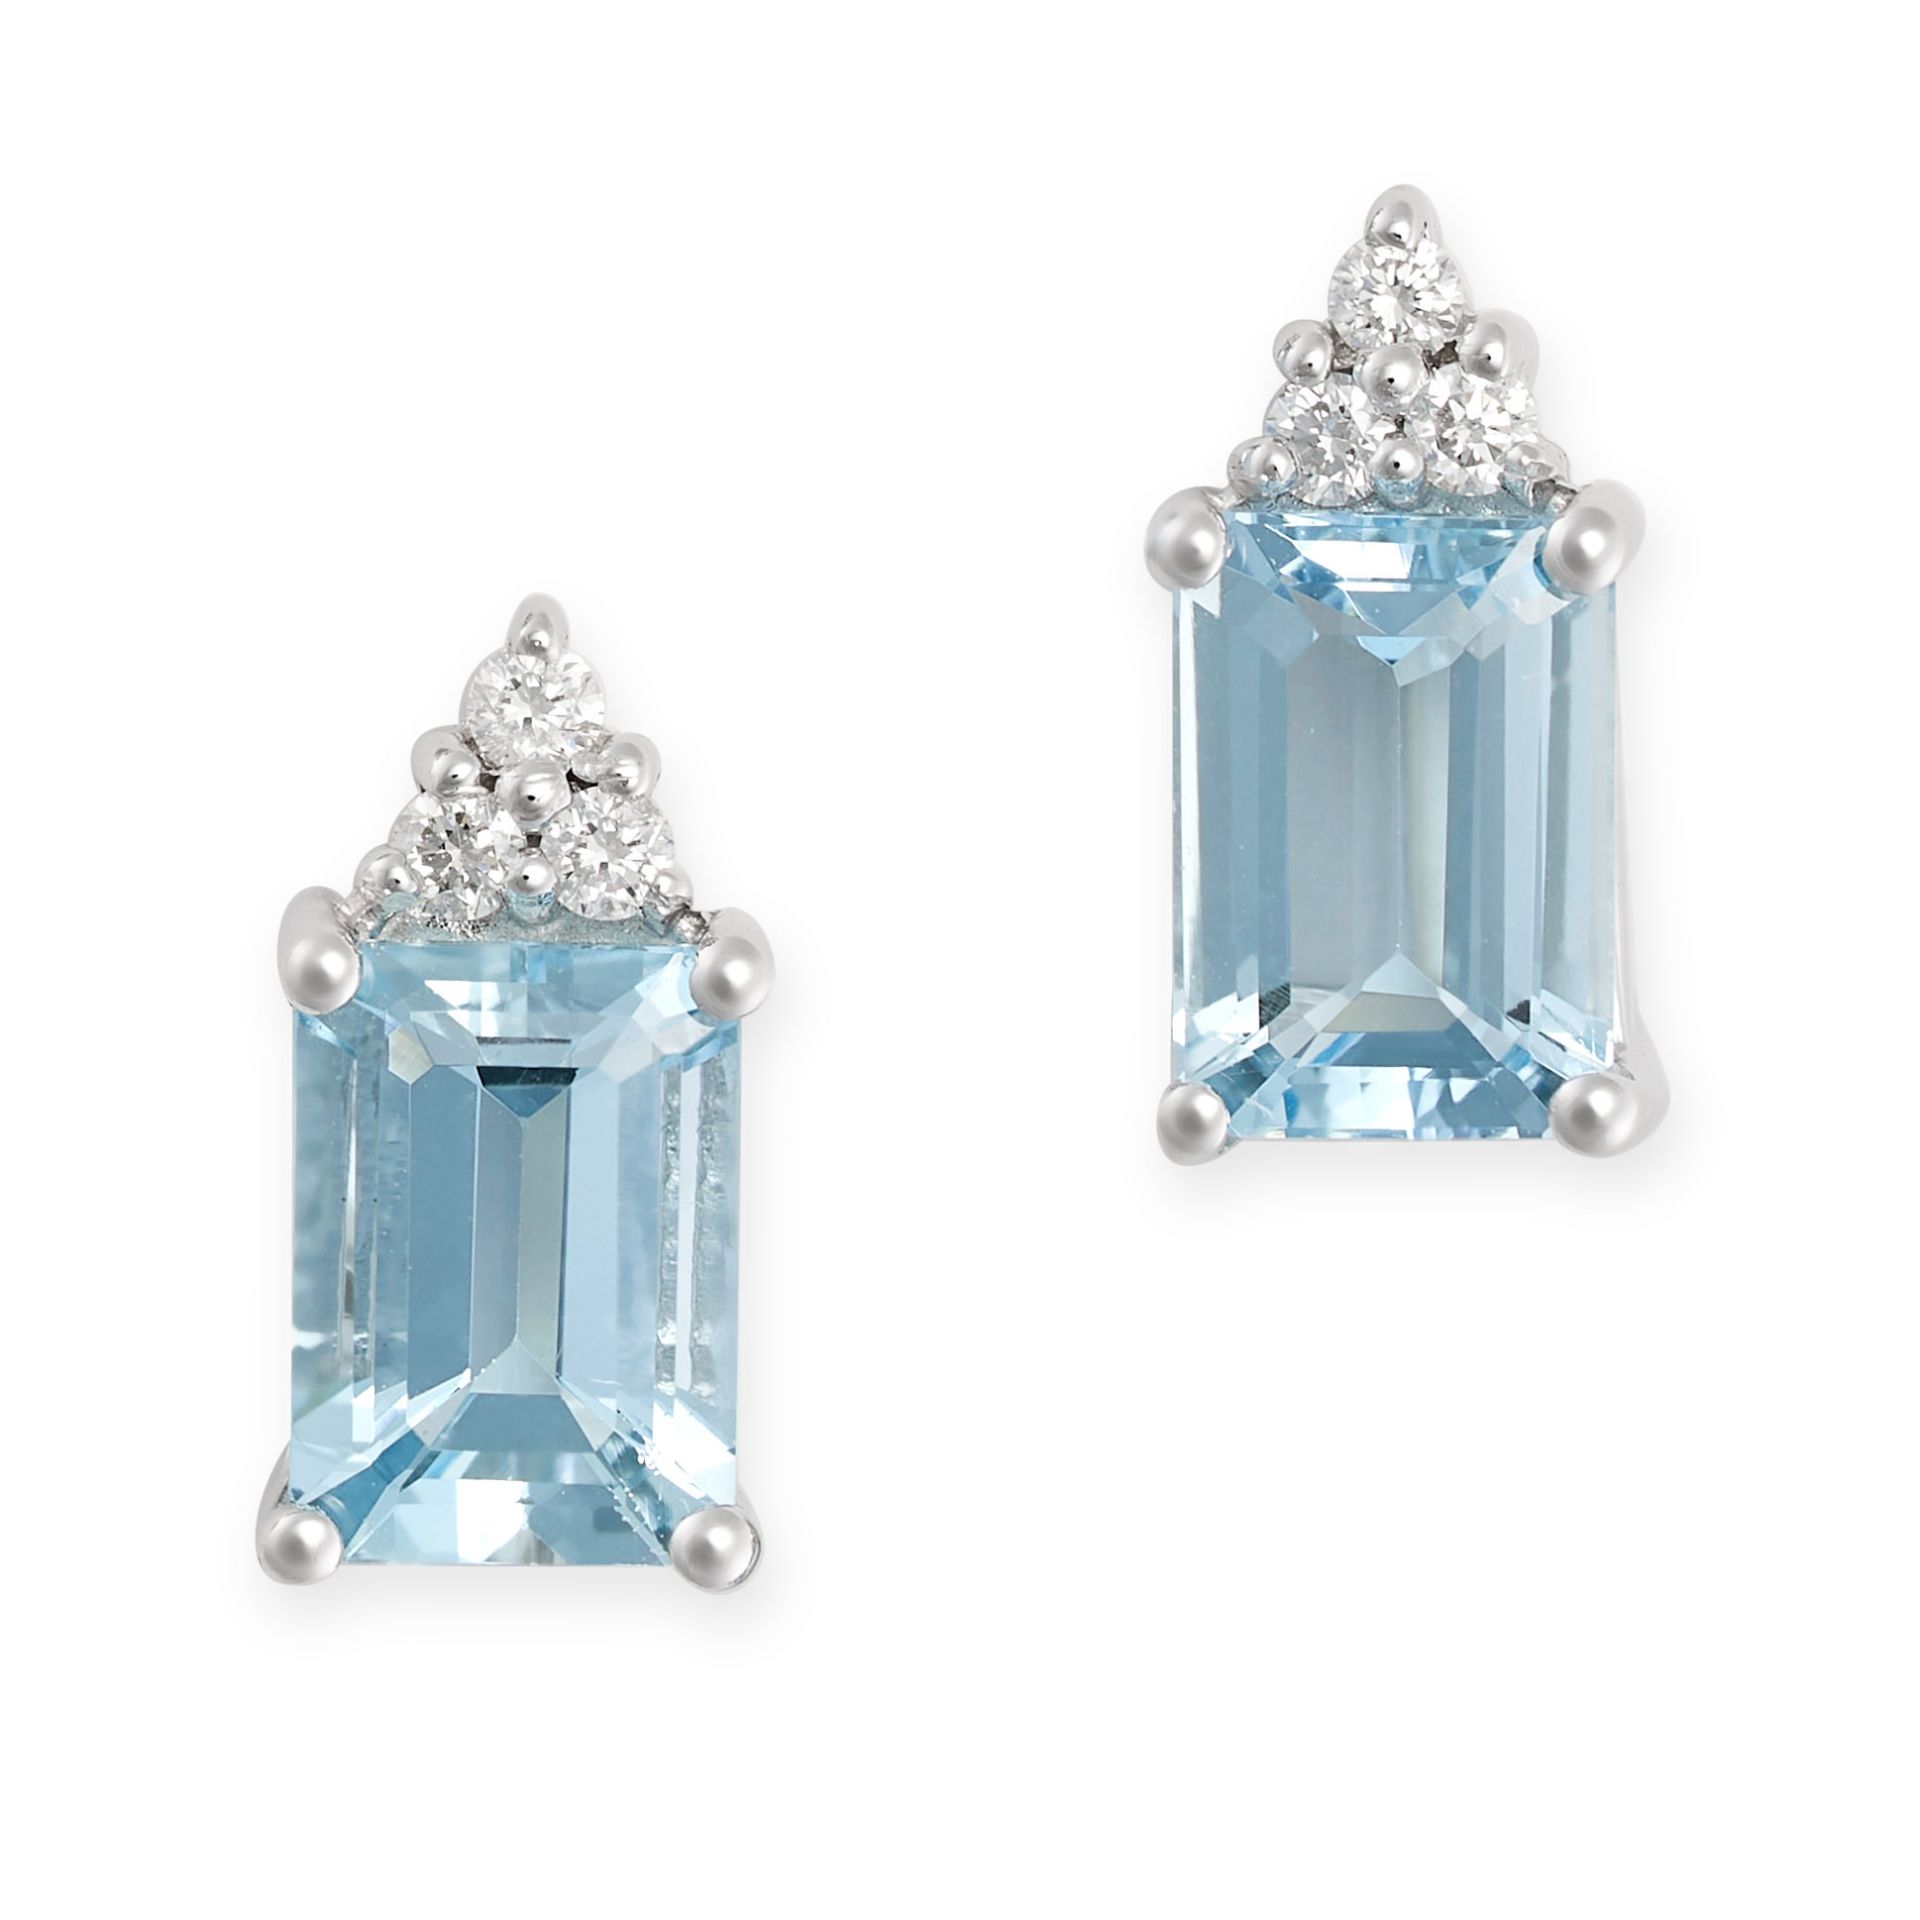 A PAIR OF AQUAMARINE AND DIAMOND EARRINGS in 18ct white gold, each set with a trio of round brill...